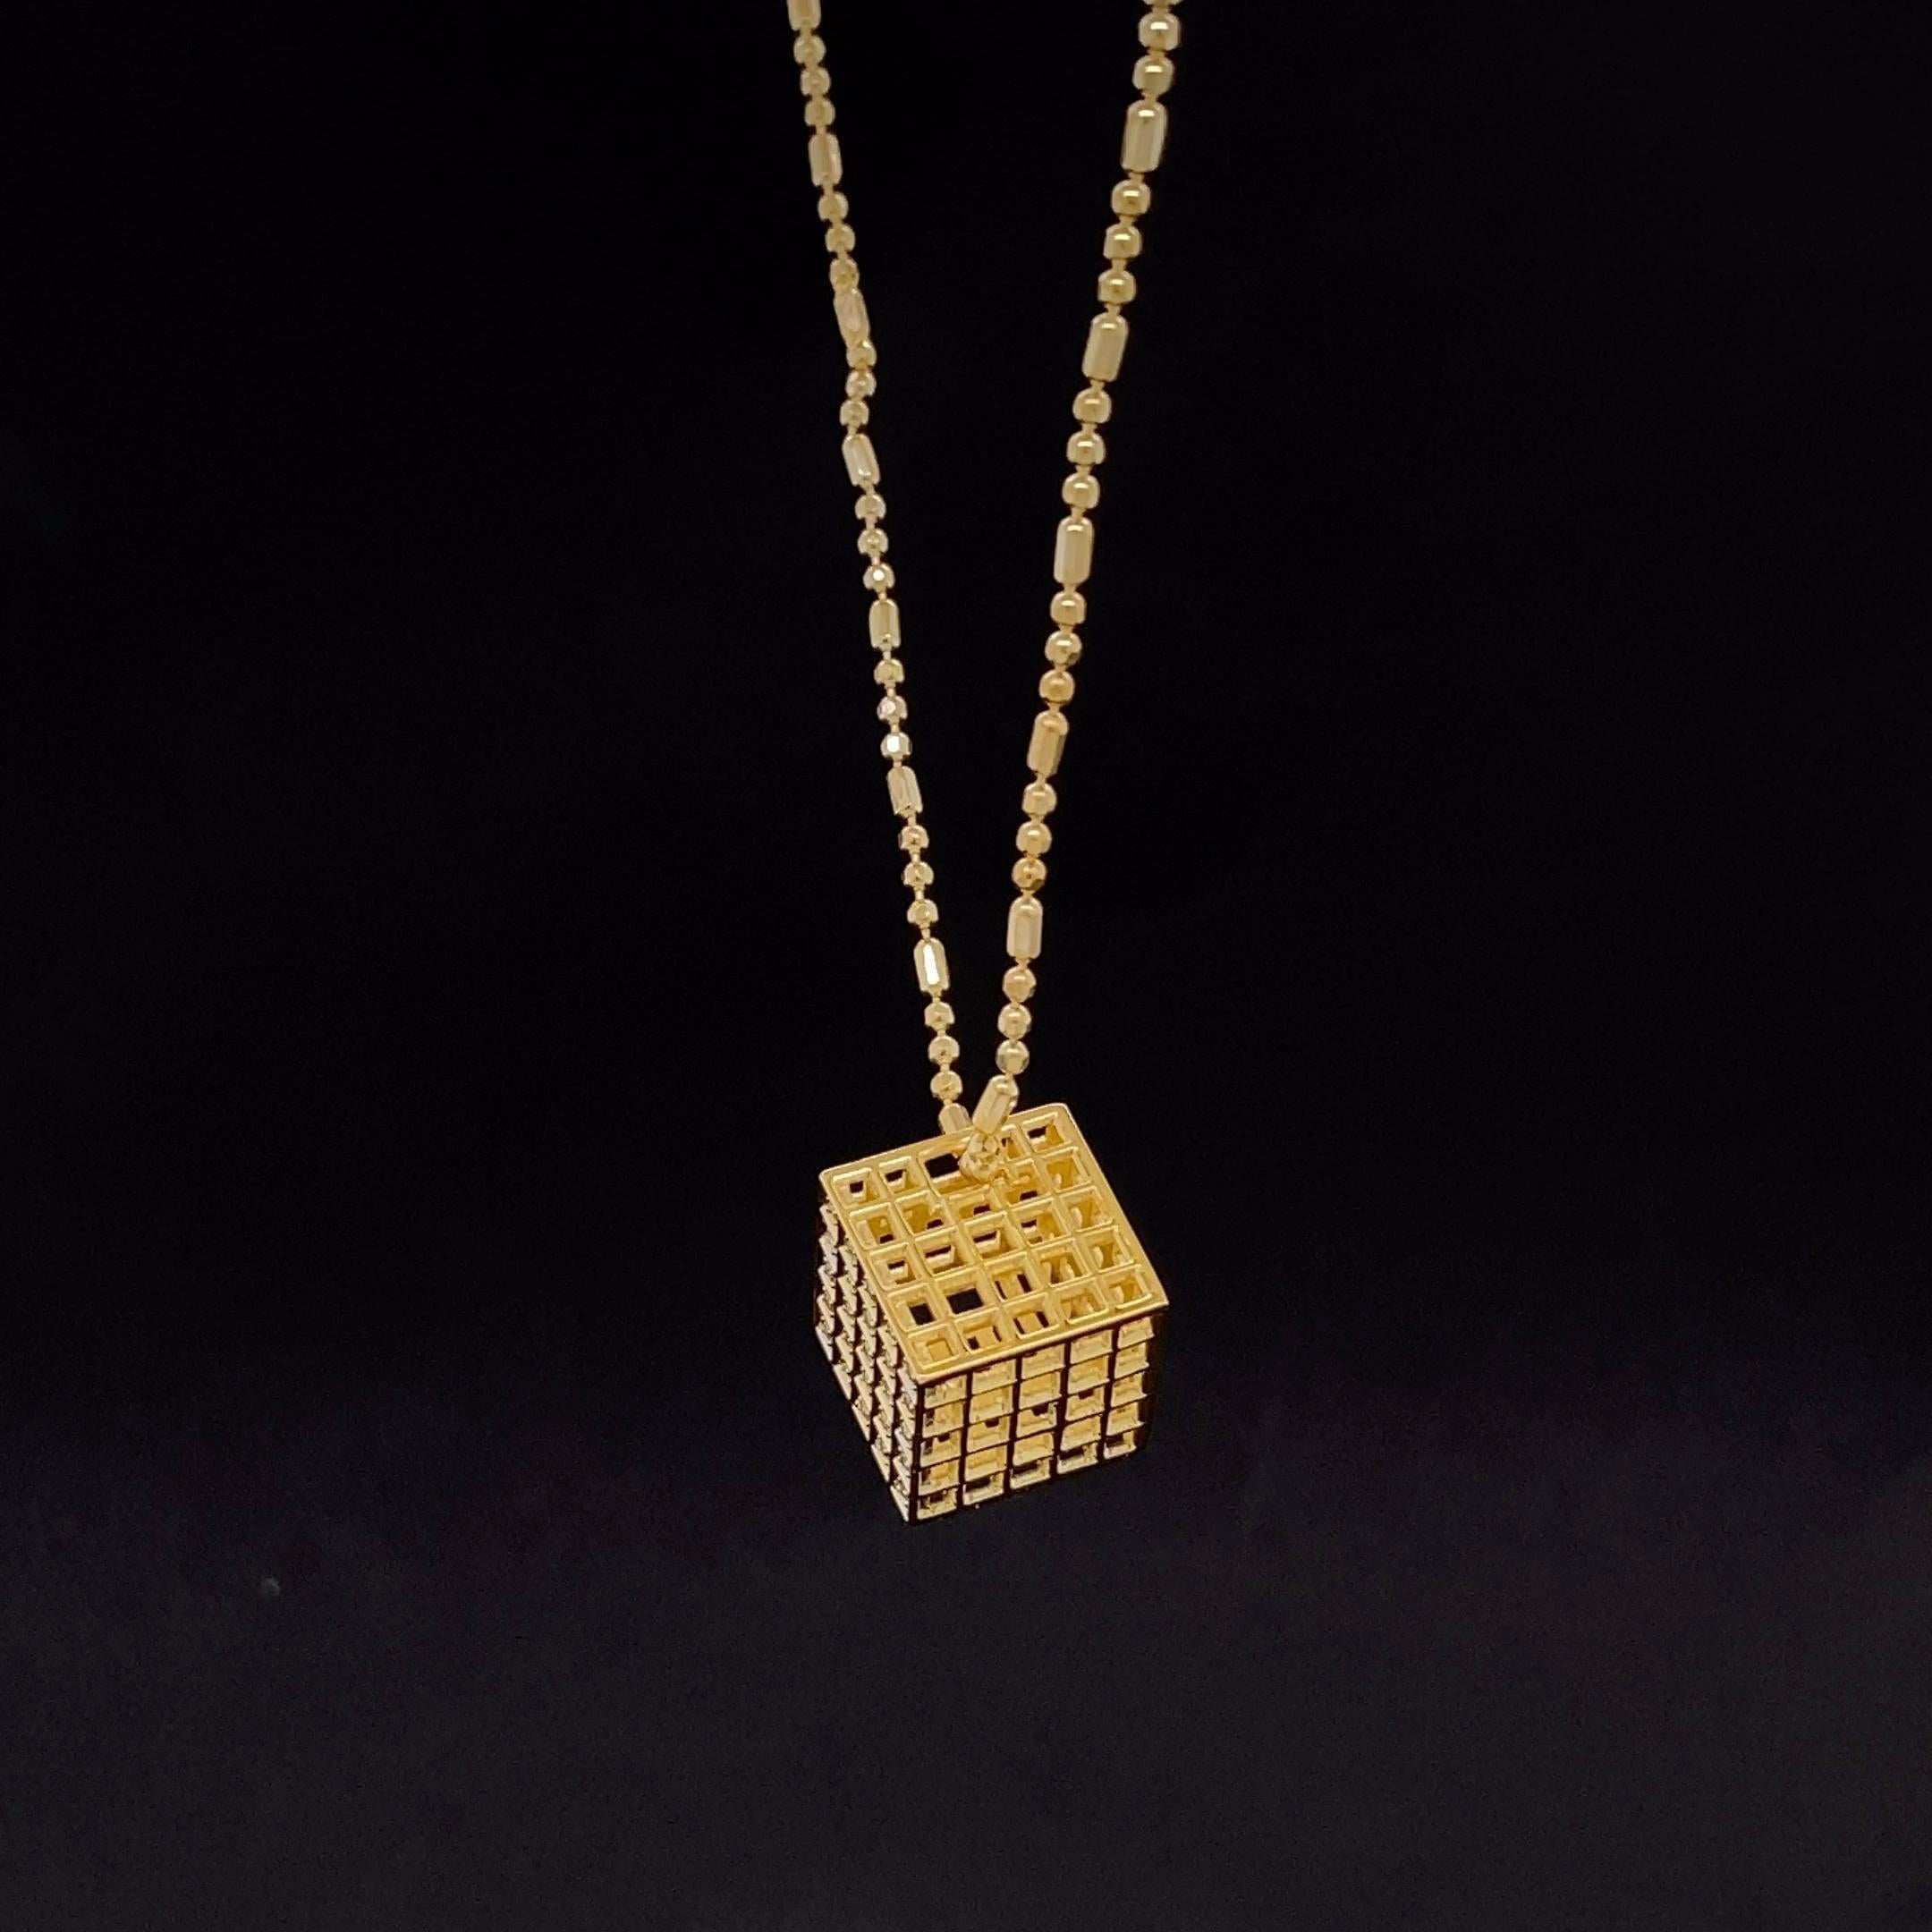 3D Solid Cube Diamond Pendant in 18k Solid Gold For Sale 2